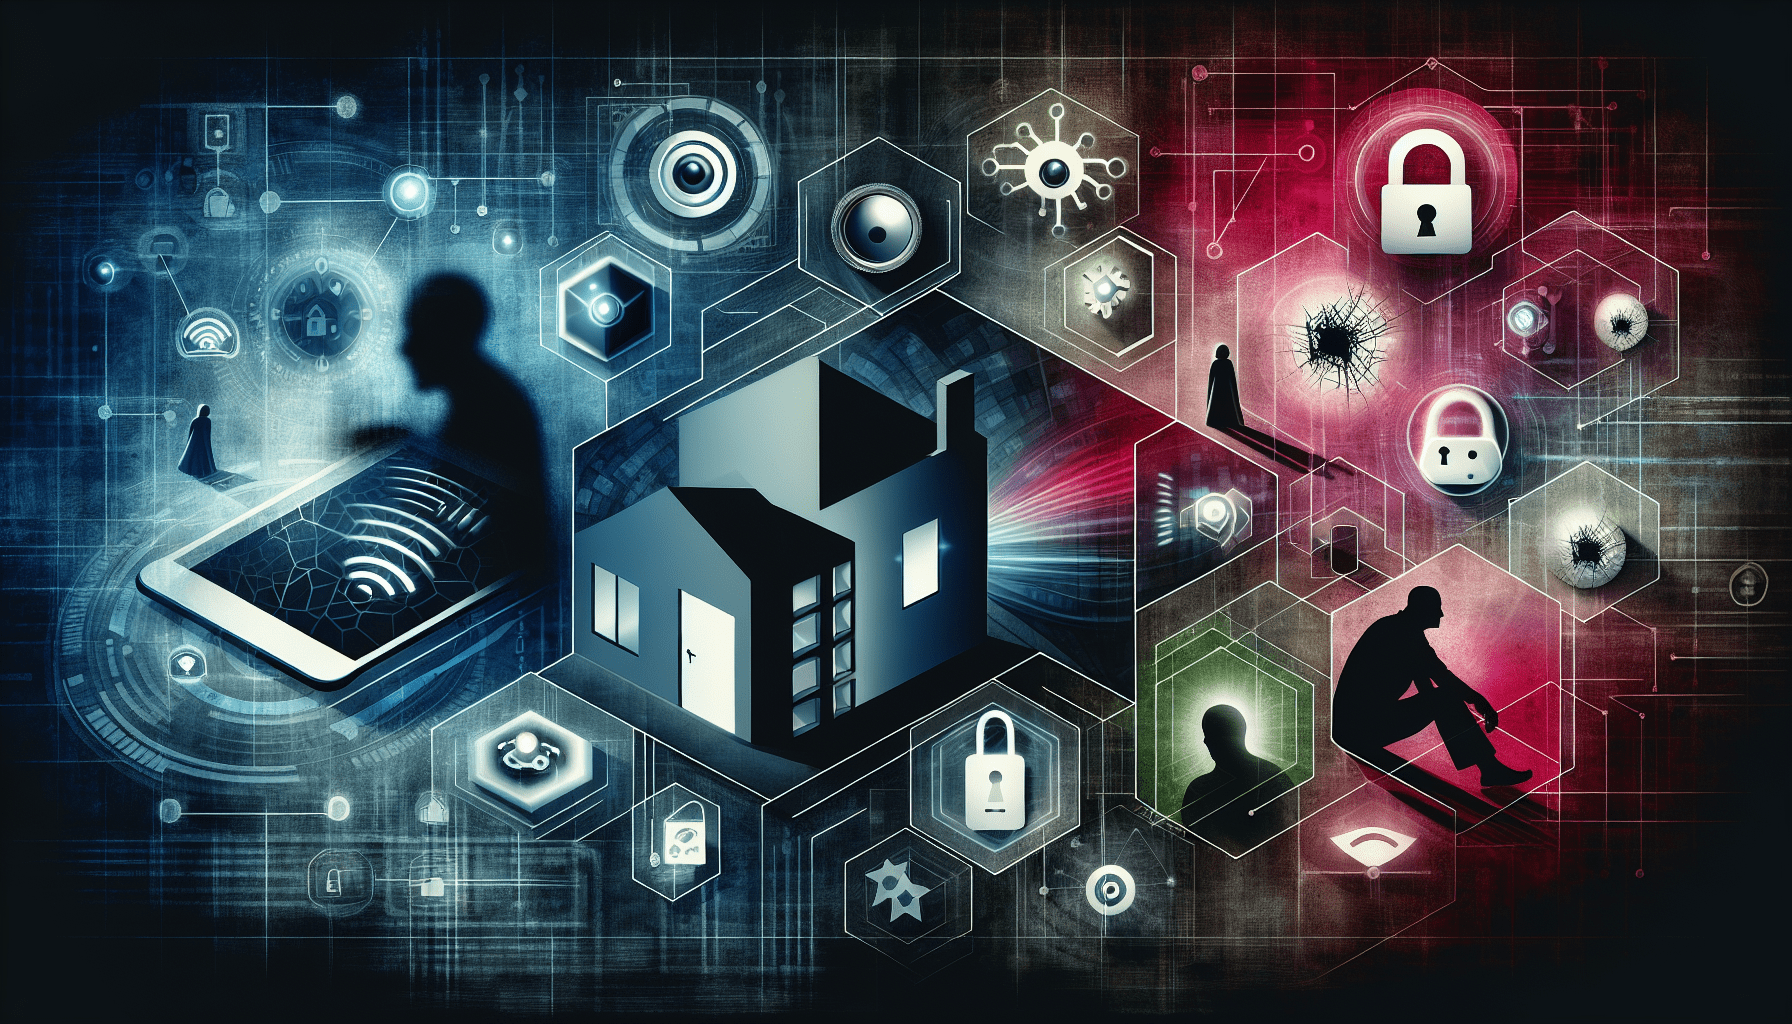 What Are The Negative Effects Of Smart Technology In Homes?